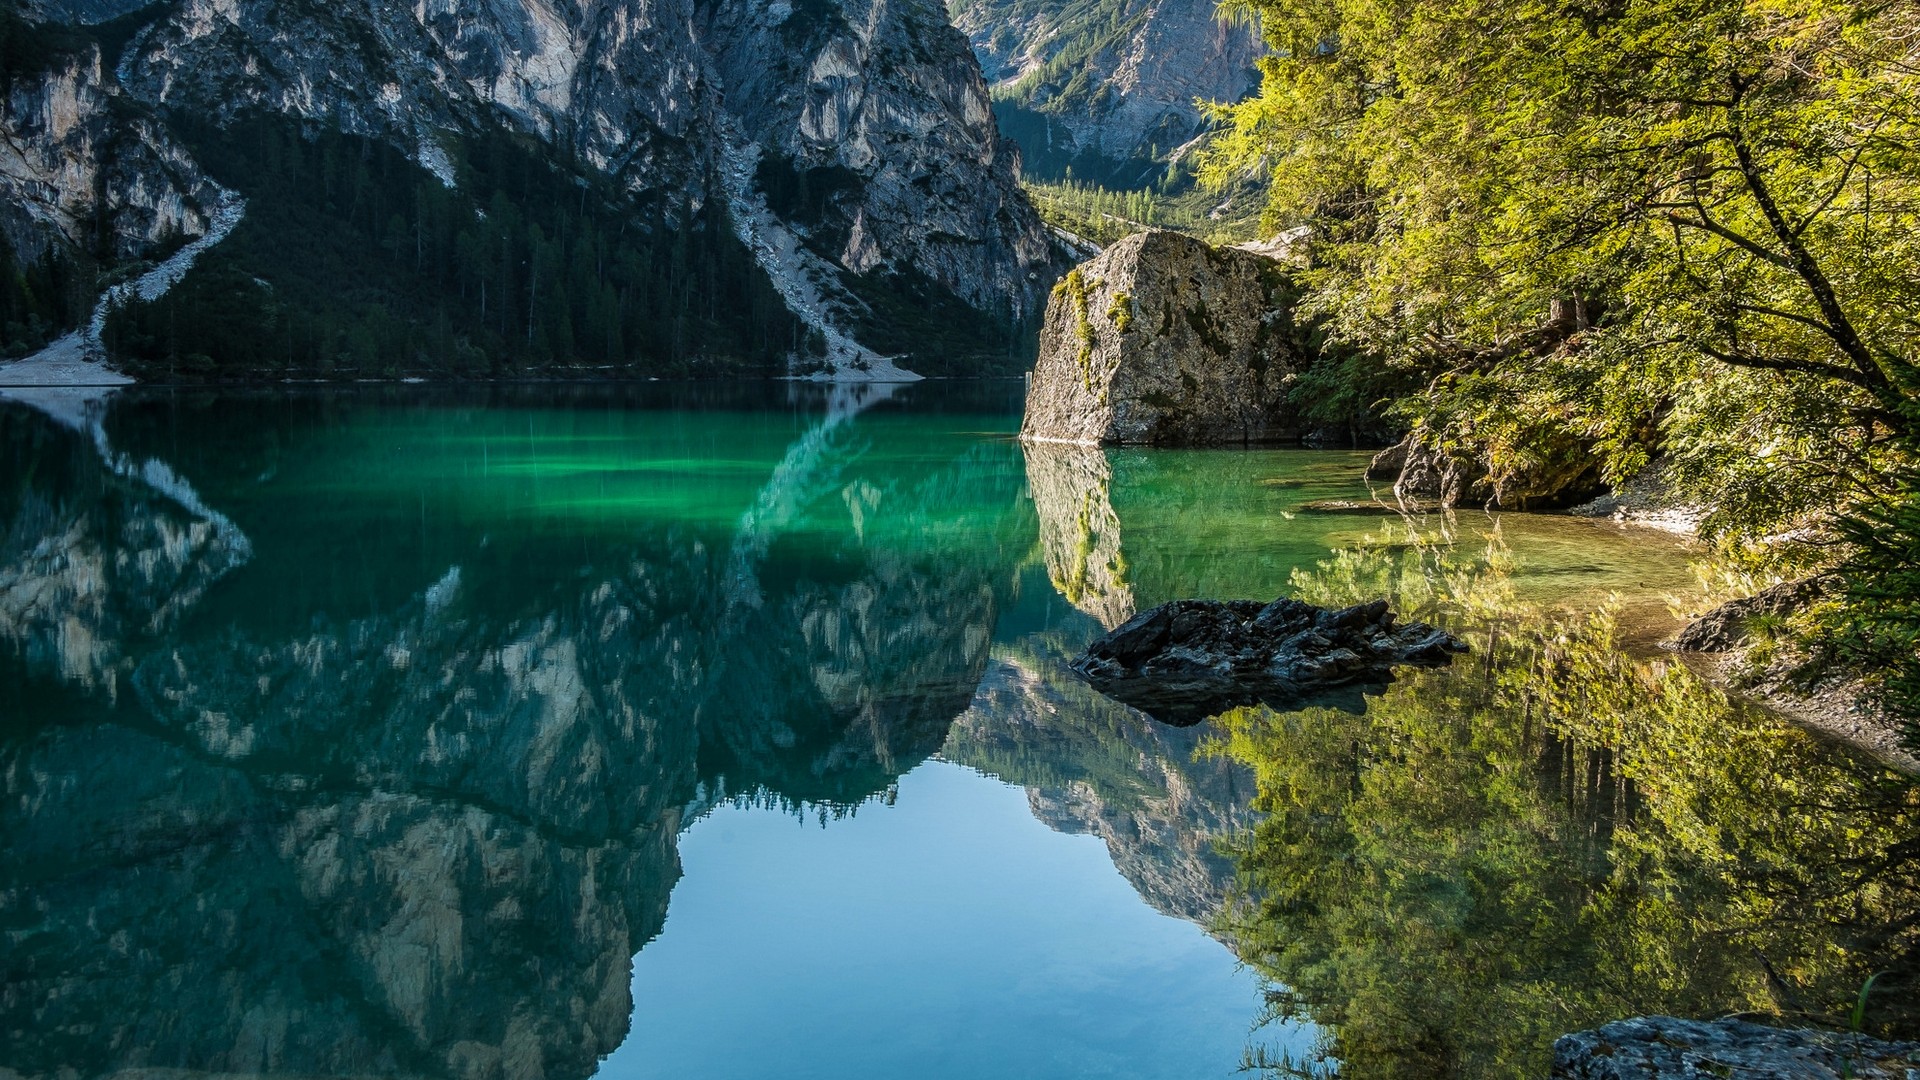 General 1920x1080 landscape nature lake mountains forest morning sunlight water reflection trees Italy